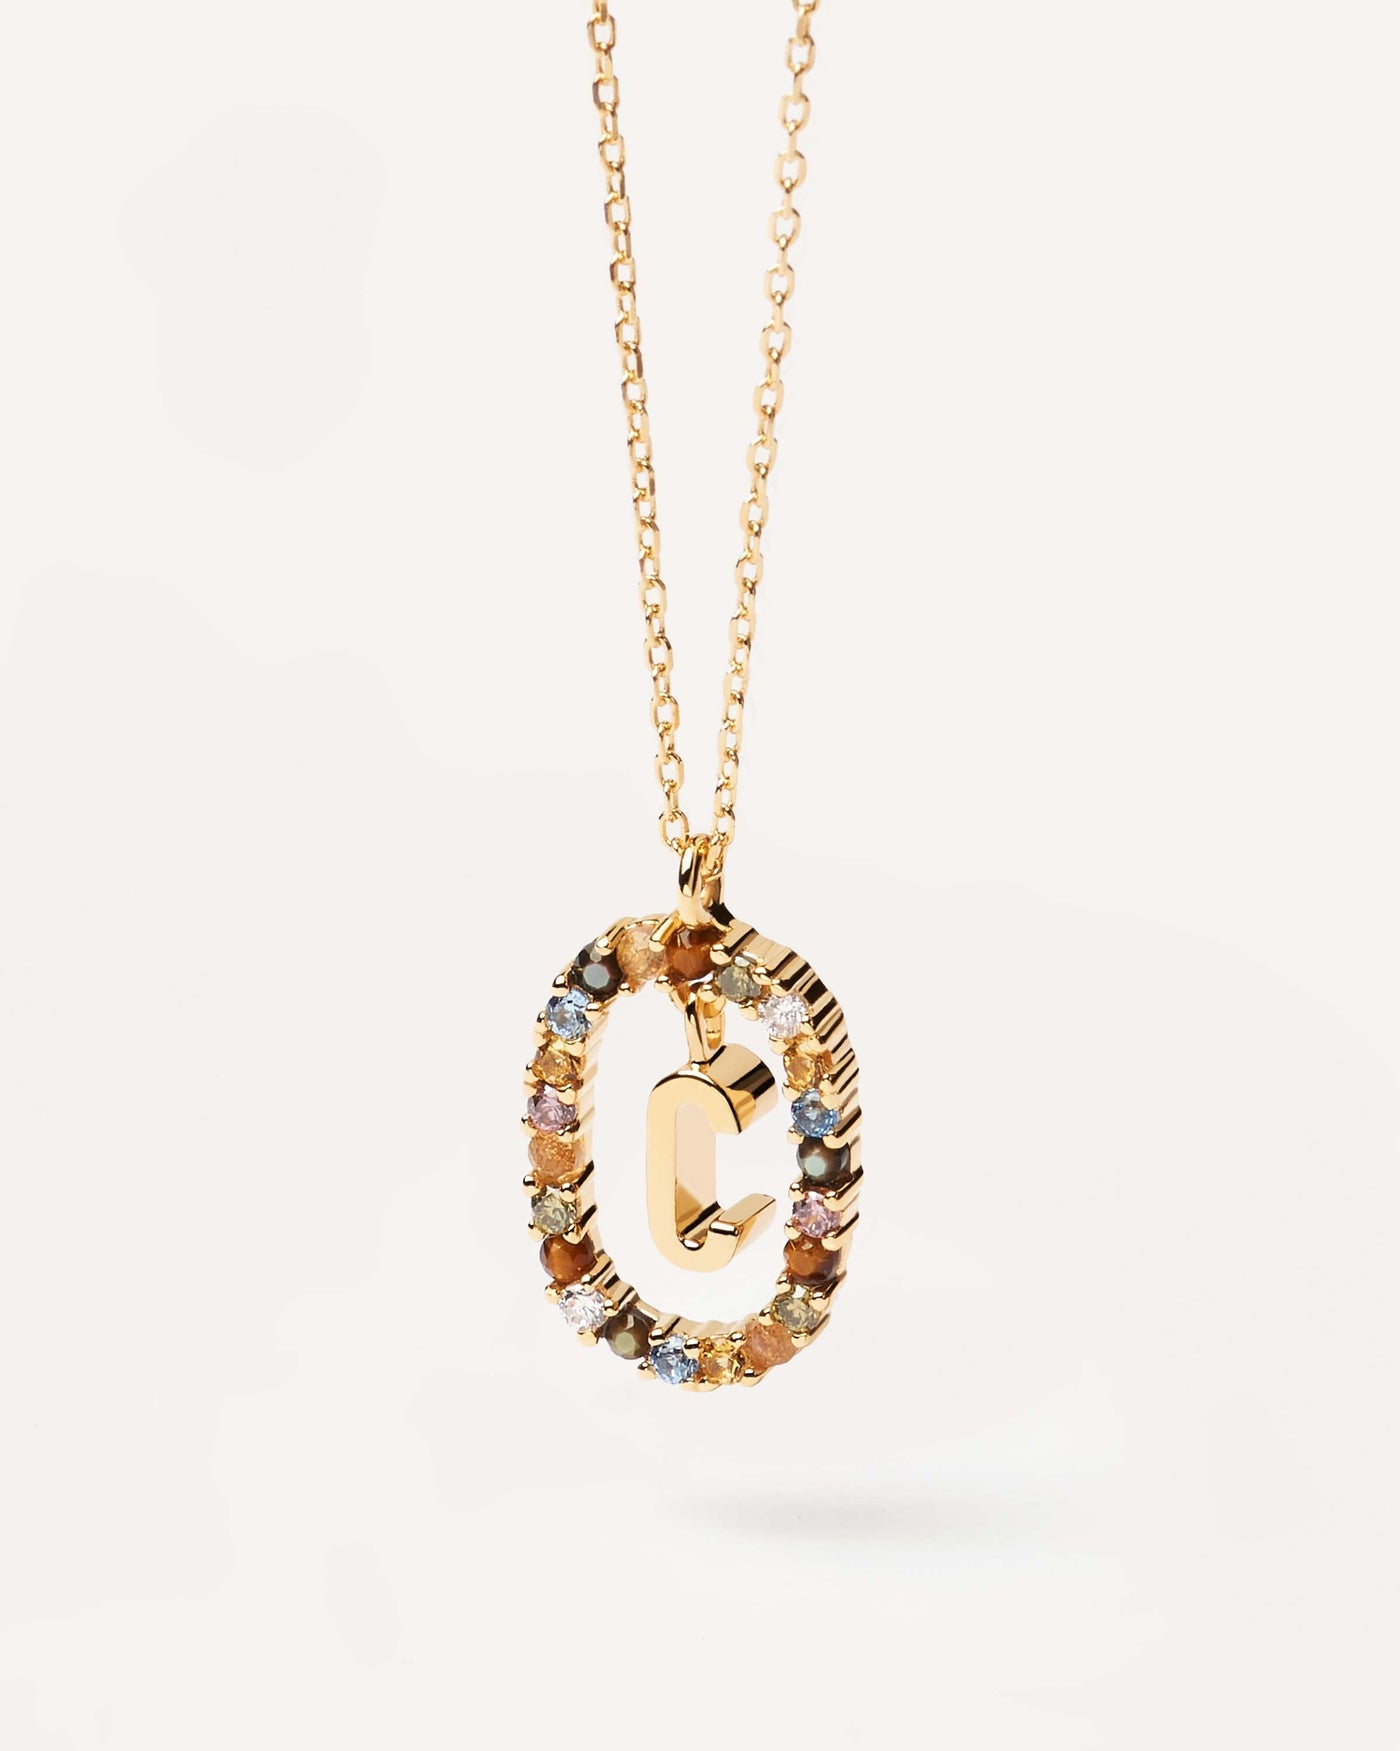 2023 Selection | Letter C necklace. Initial C necklace in gold-plated silver, circled by colorful gemstones. Get the latest arrival from PDPAOLA. Place your order safely and get this Best Seller. Free Shipping.